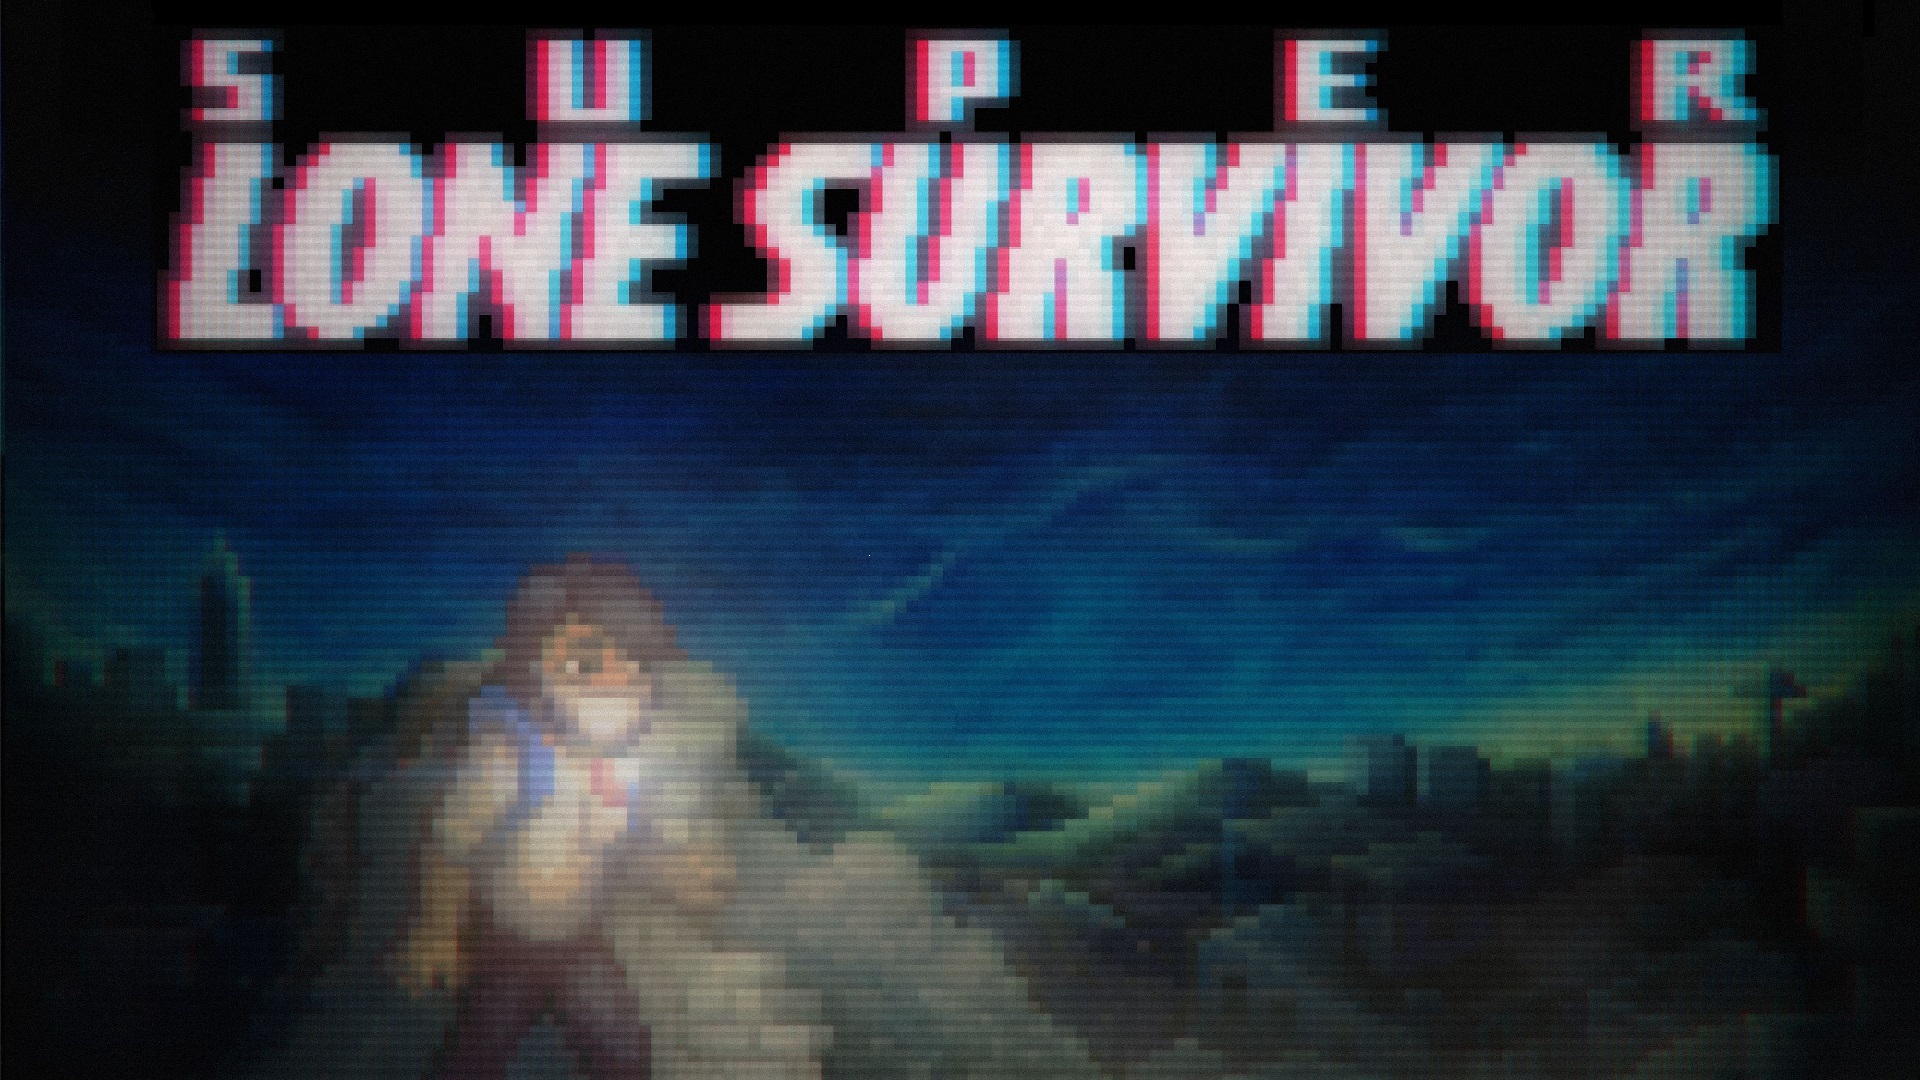 jasper byrne on X: Super Lone Survivor is a remake of the original game  with additional content & music, improved graphics and sound, new  sidequests and endings, achievements, improved map & combat.